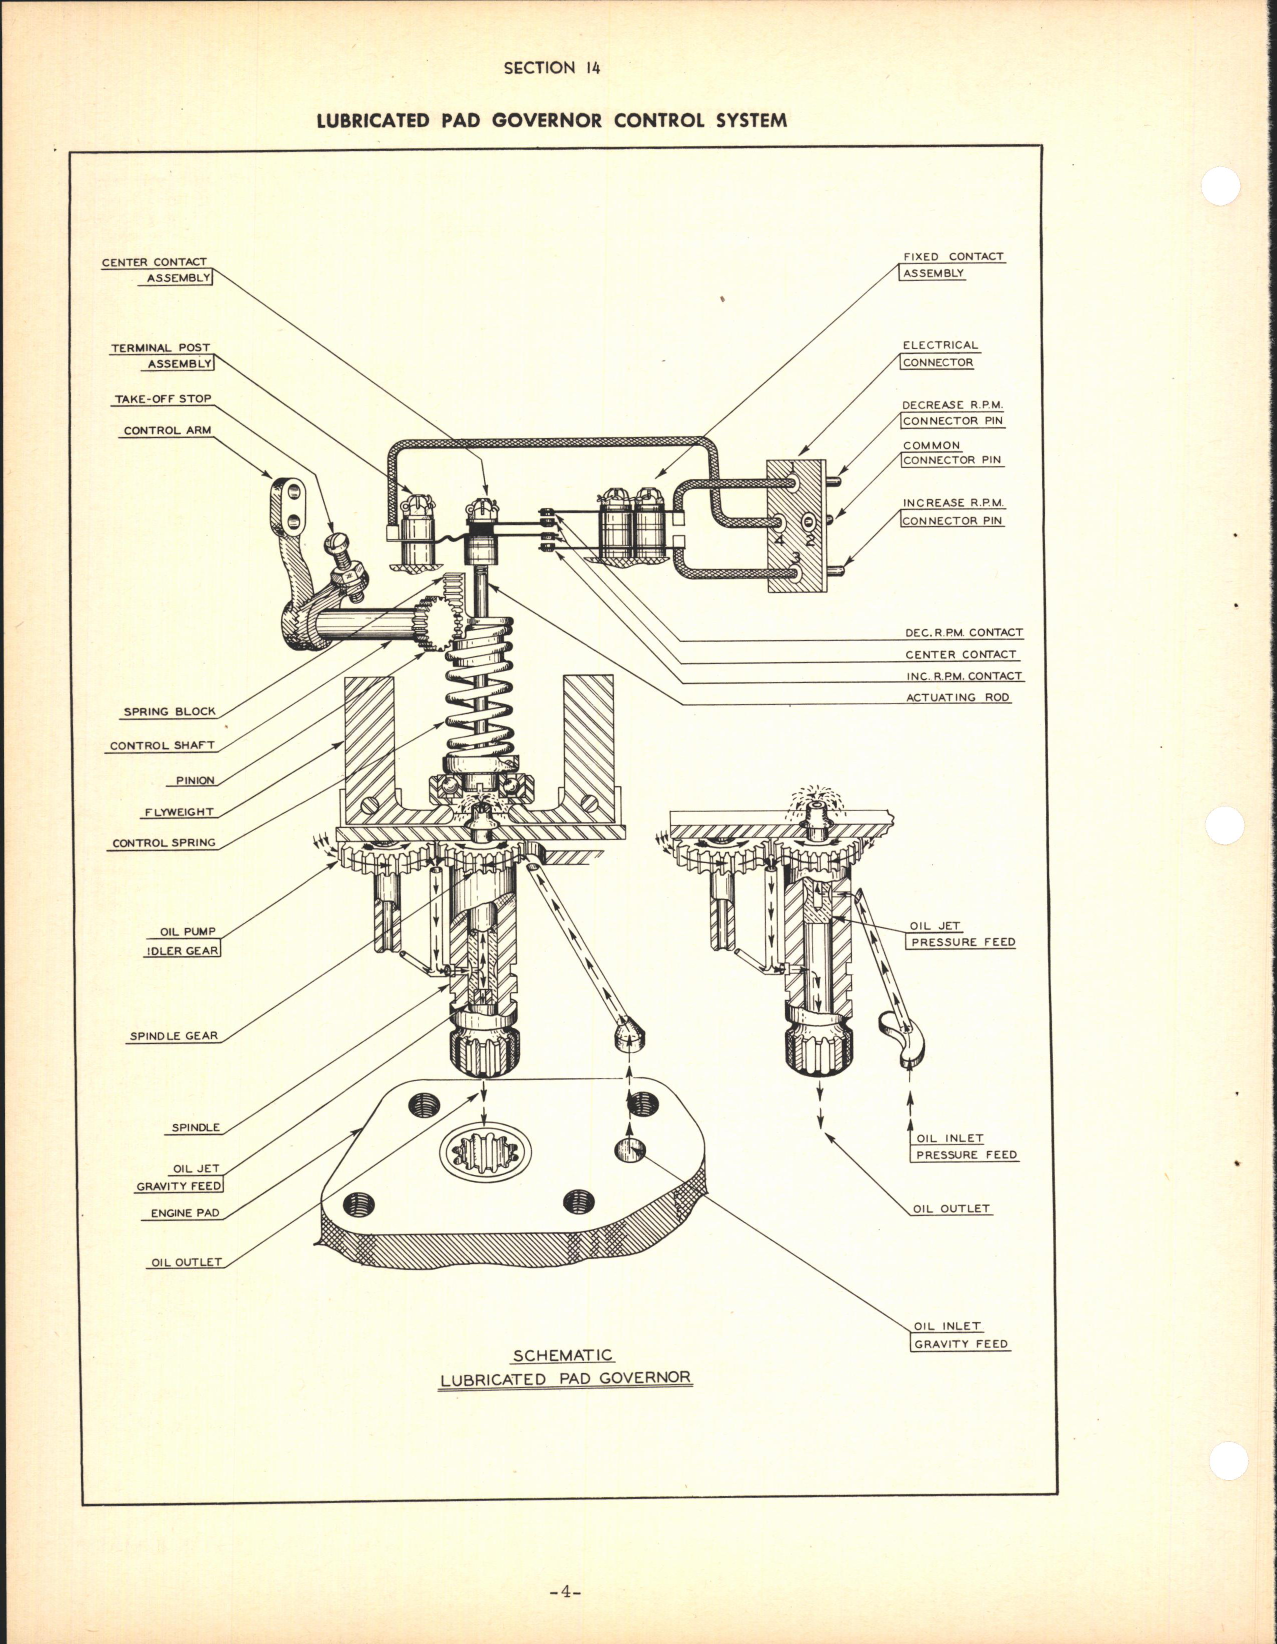 Sample page 6 from AirCorps Library document: Section 14 - Lubricated Pad Governor Control System